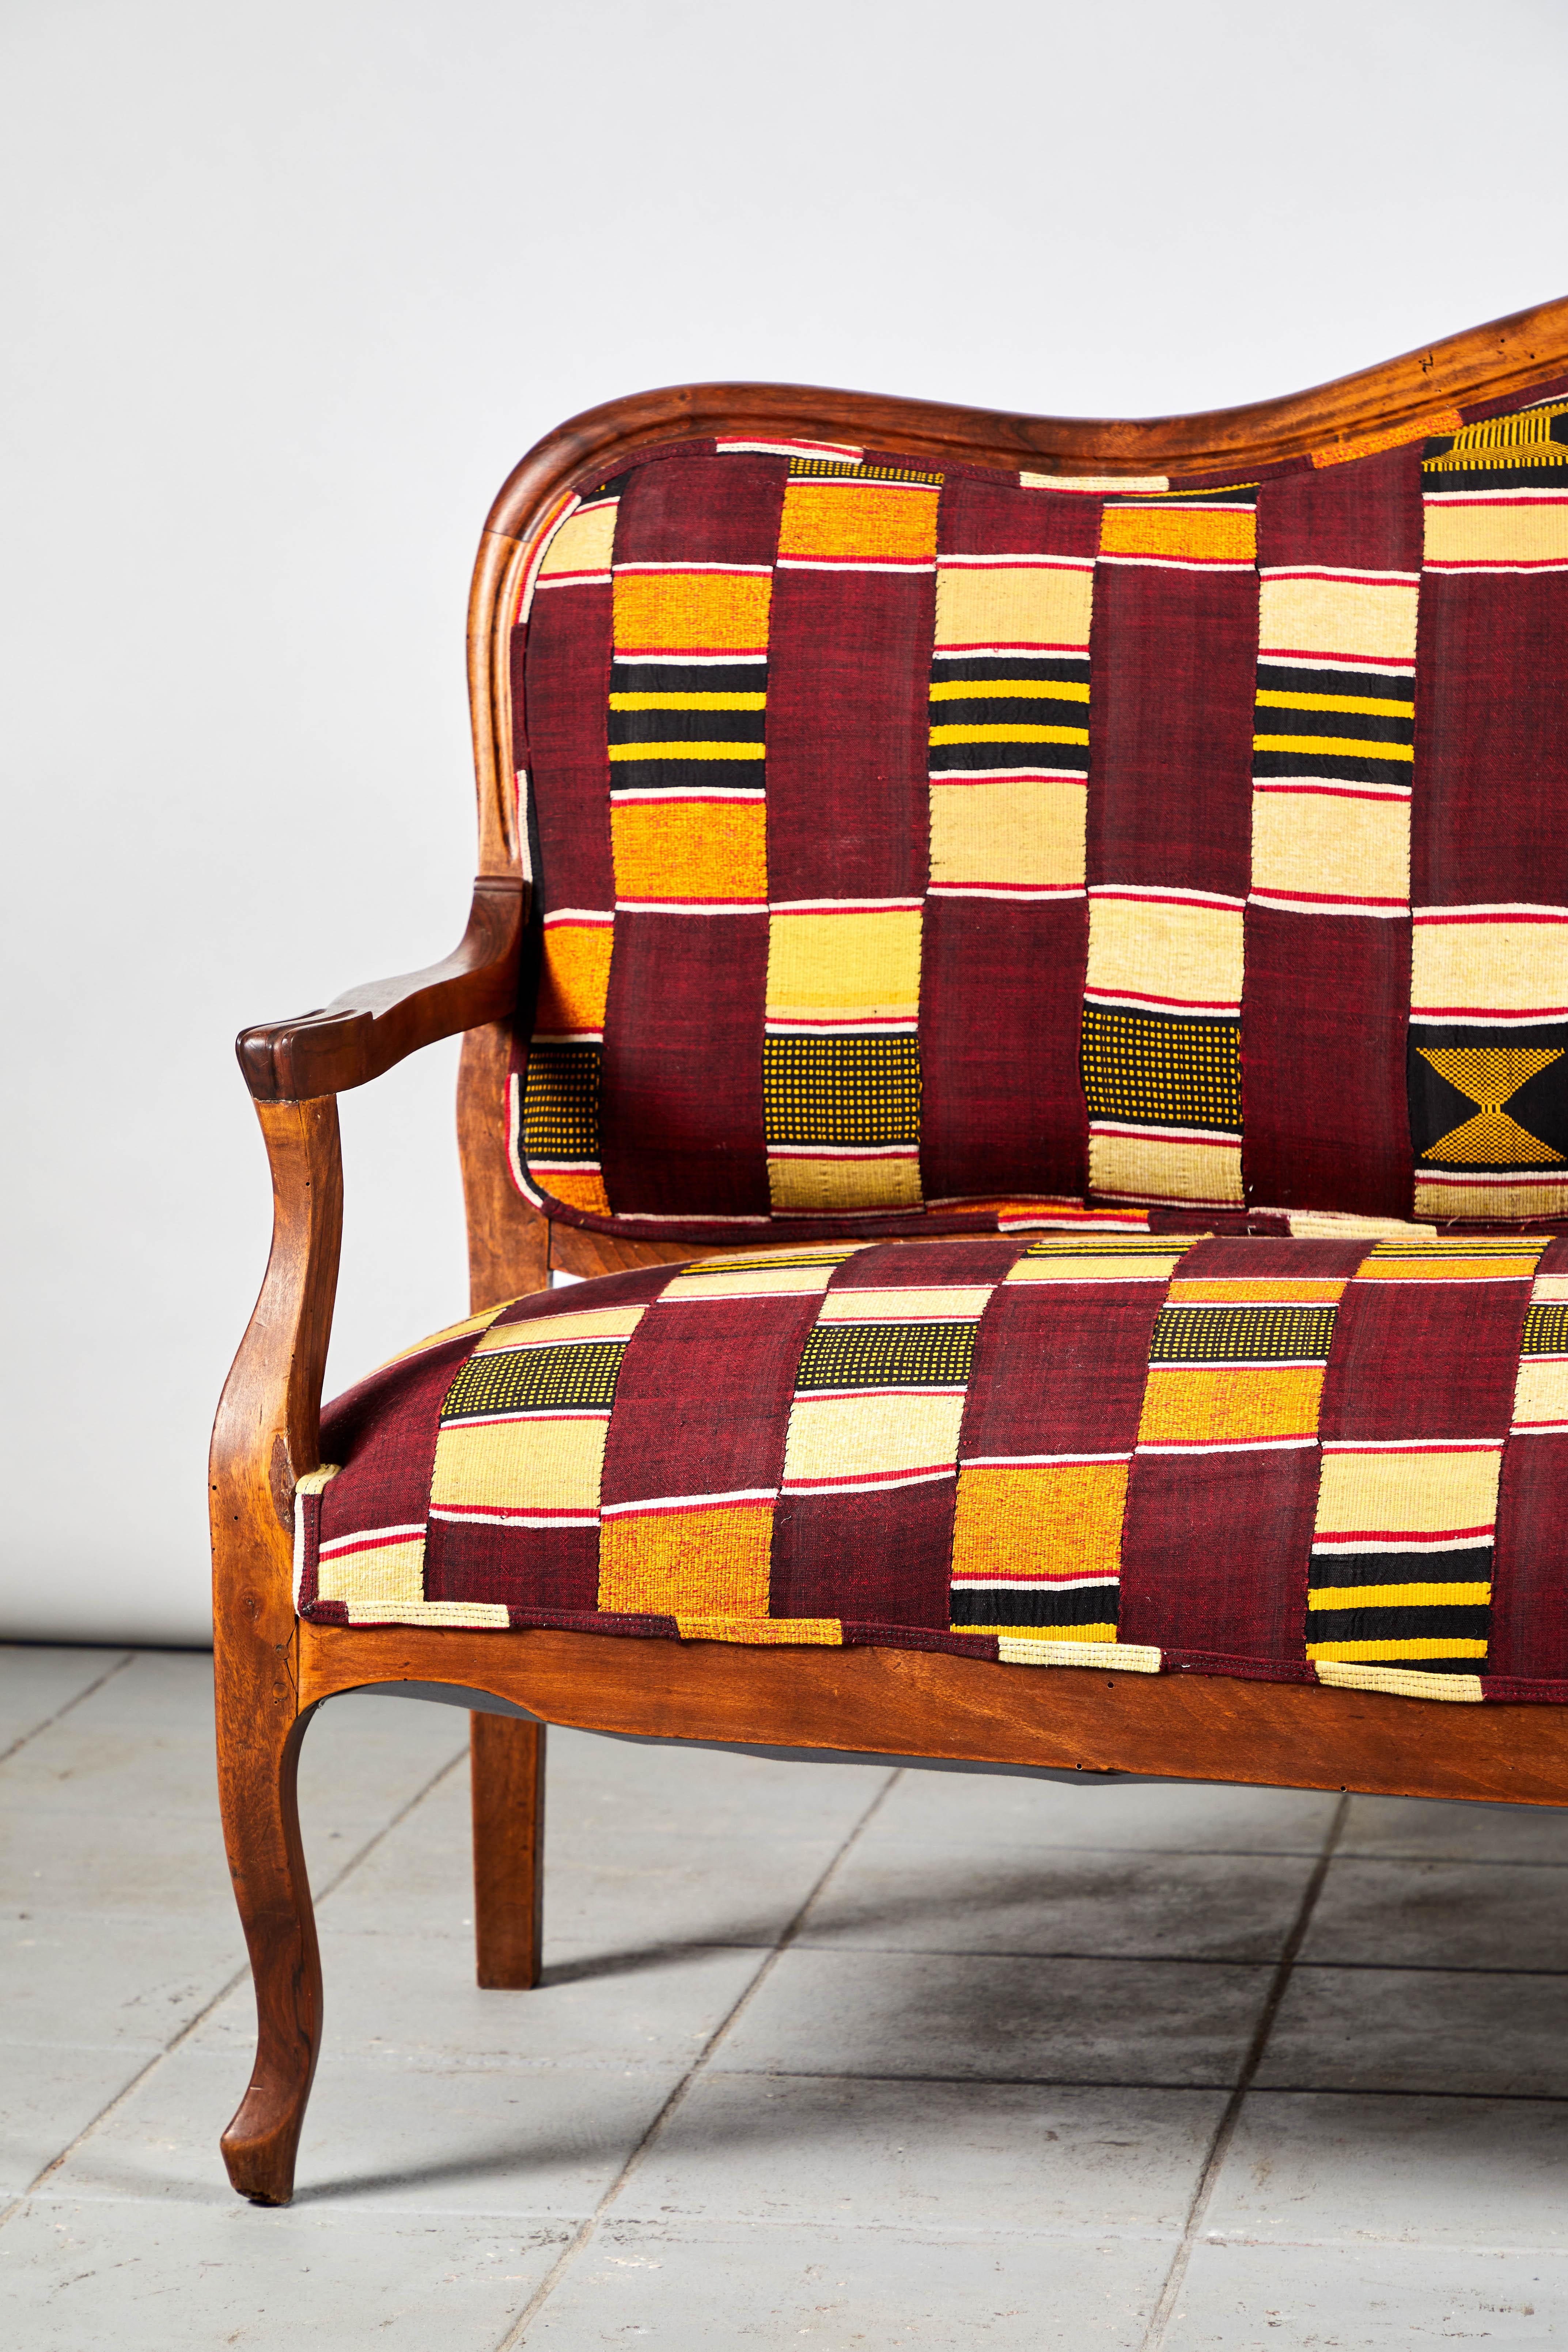 Beautifully constructed French framed camelback bench upholstered in a one of a kind vintage Ewe fabric from Ghana. The fabric is beautifully handmade with a colorful patchwork pattern.